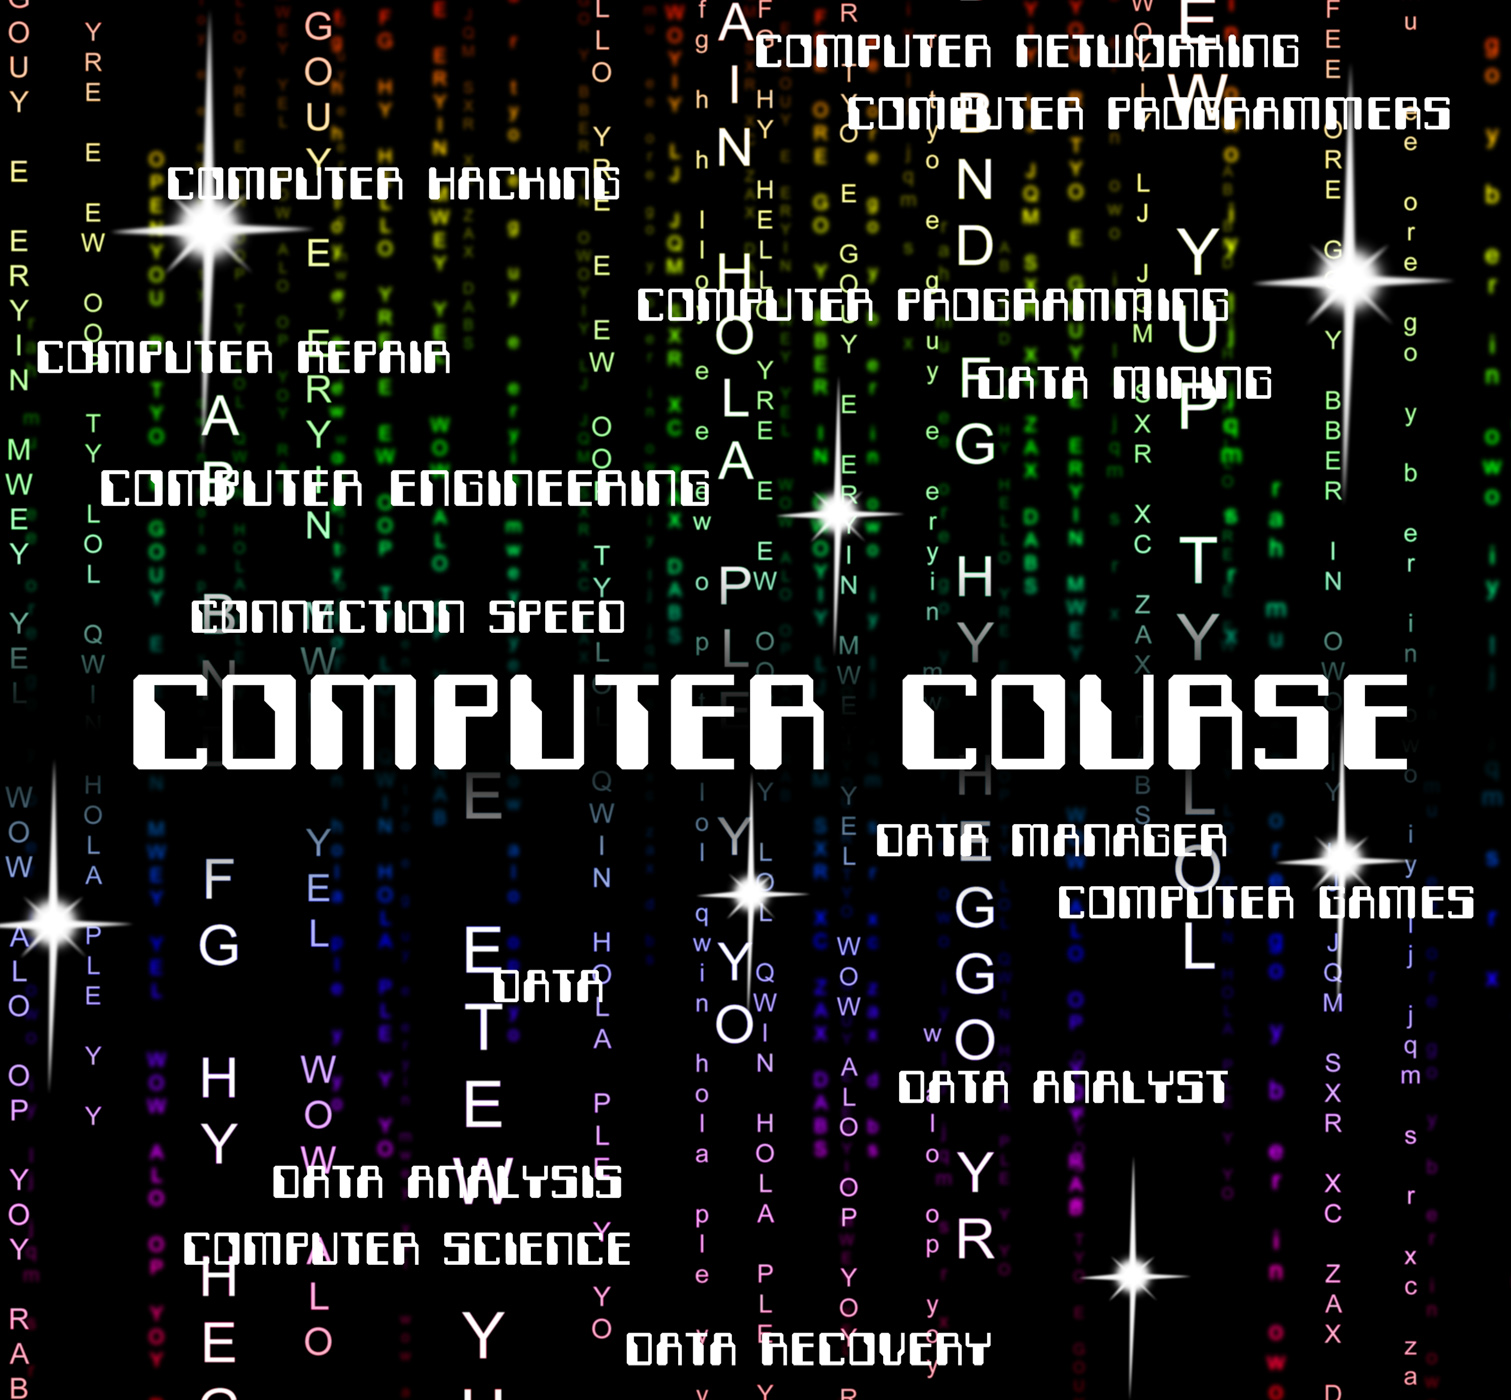 Computer course shows connection courses and program photo